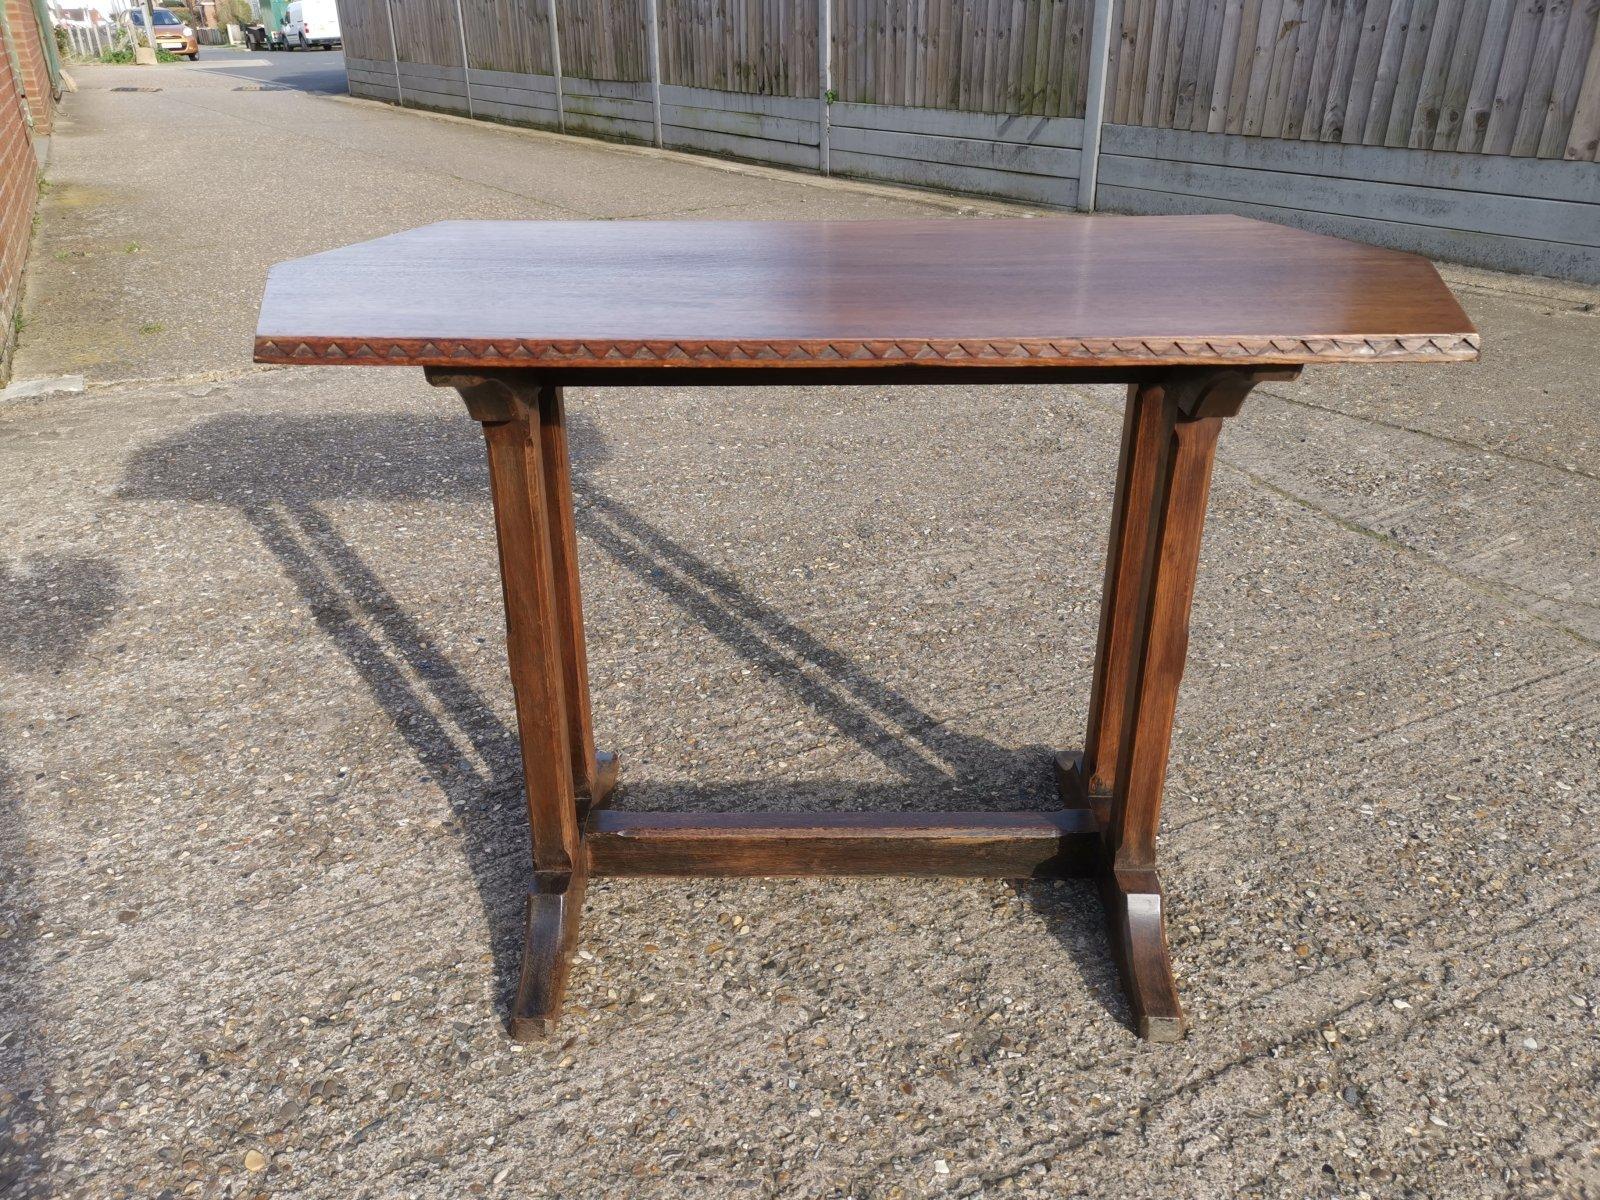 A Cotswold-style oak refectory dining or library table with carved chevron detailing to the edges of the double-angled ended top. On twin upright legs with 45 degree chamfered edges that unite to the shaped feet, the lower stretcher full length with